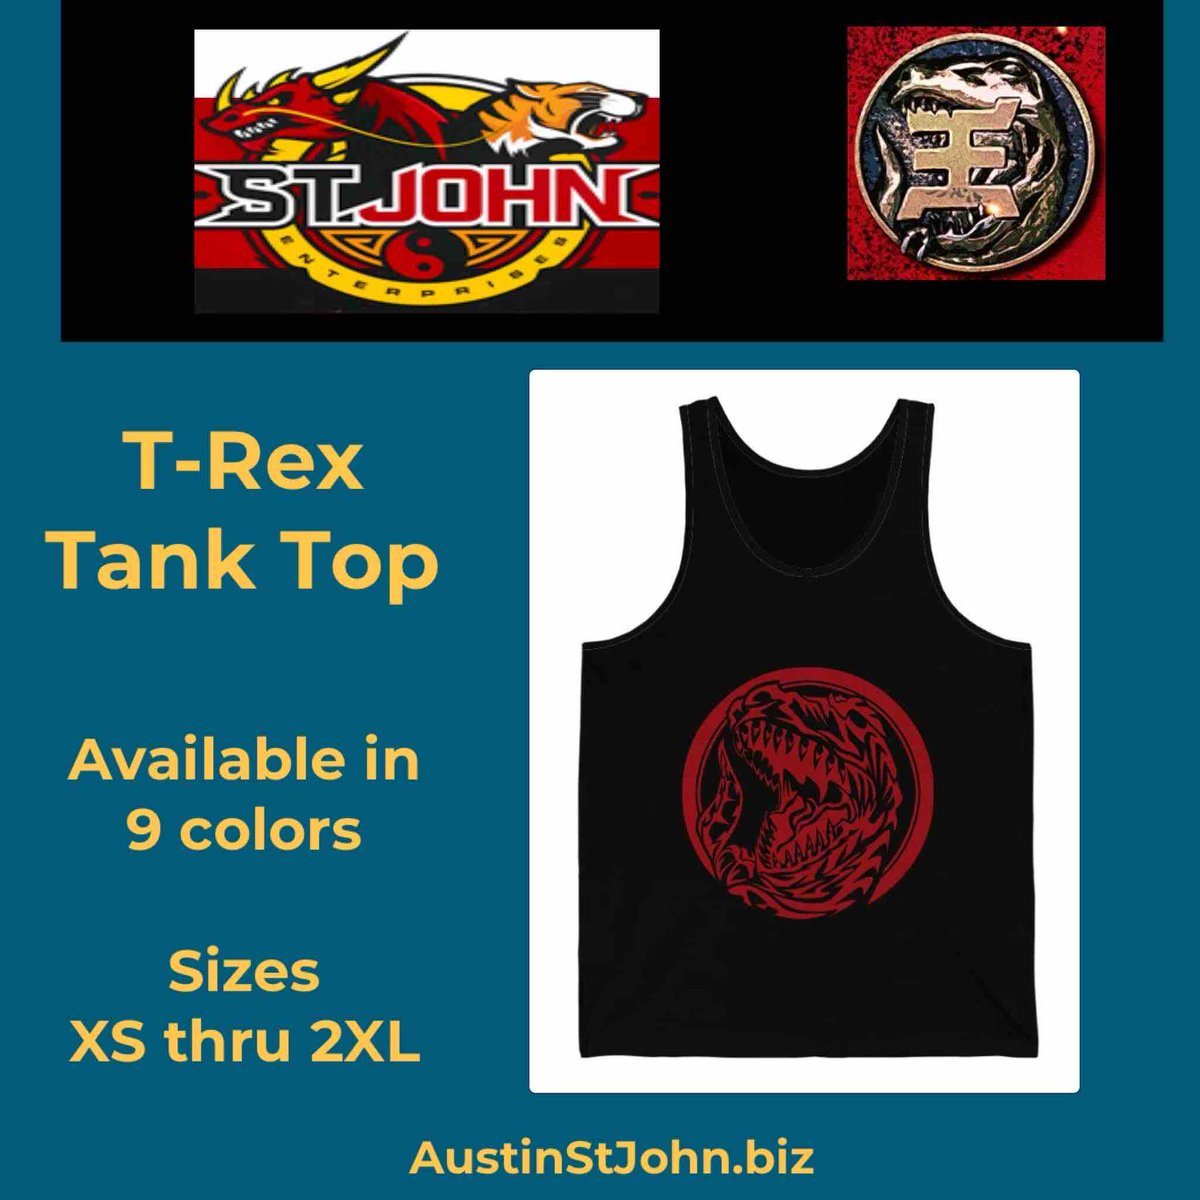 Want to show off your favorite fandom? You can find a variety of items, like this tank, on my website: austinstjohn.biz. Perfect for the upcoming summer heat or at the gym. #gymwear #trex #powerrangers